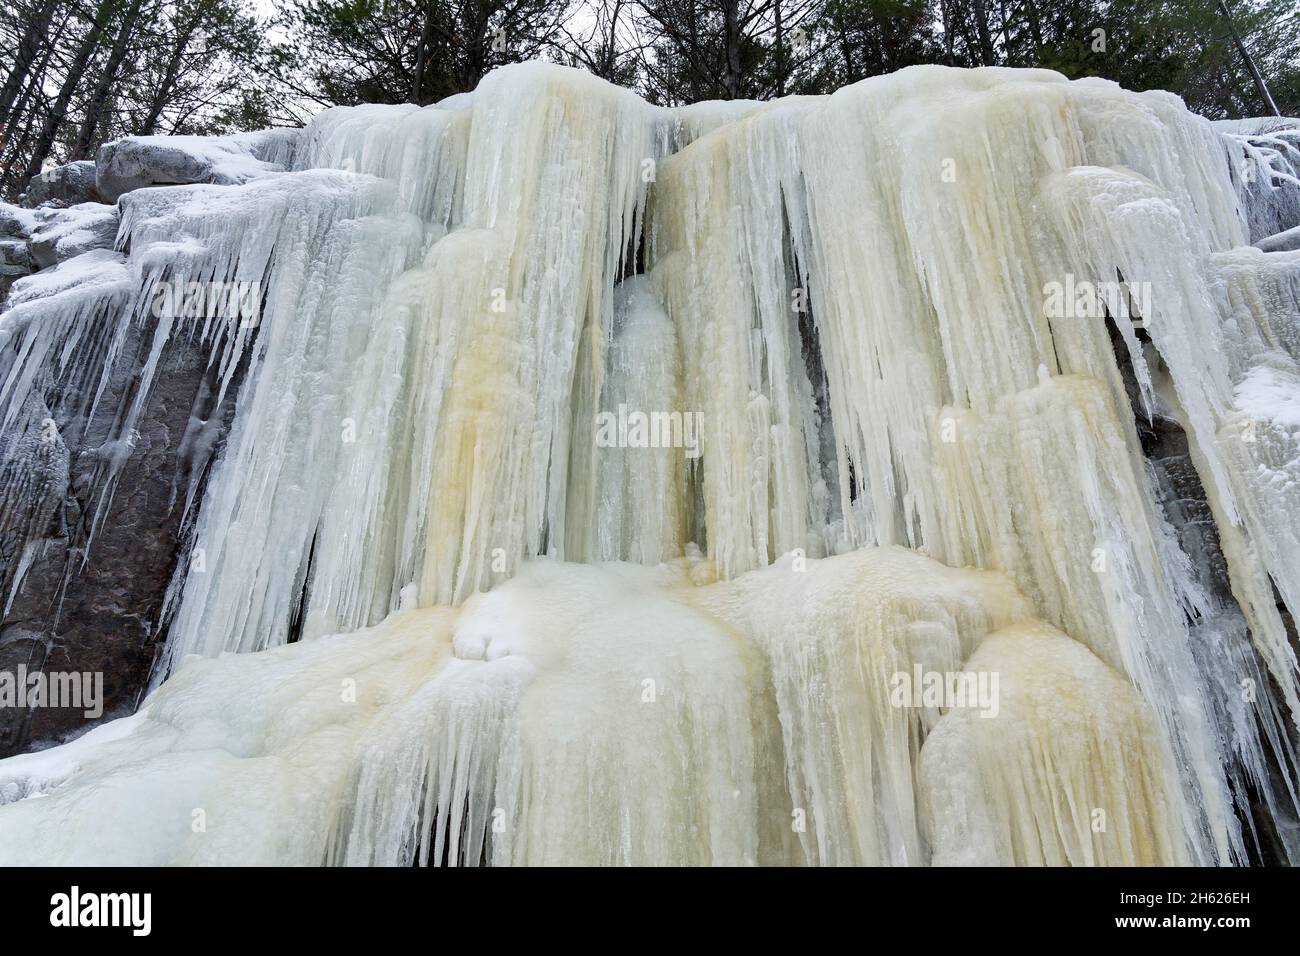 canada,southern ontario,bon echo provincial park,frozen waterfall,ice,iron oxide mineral stains, Stock Photo